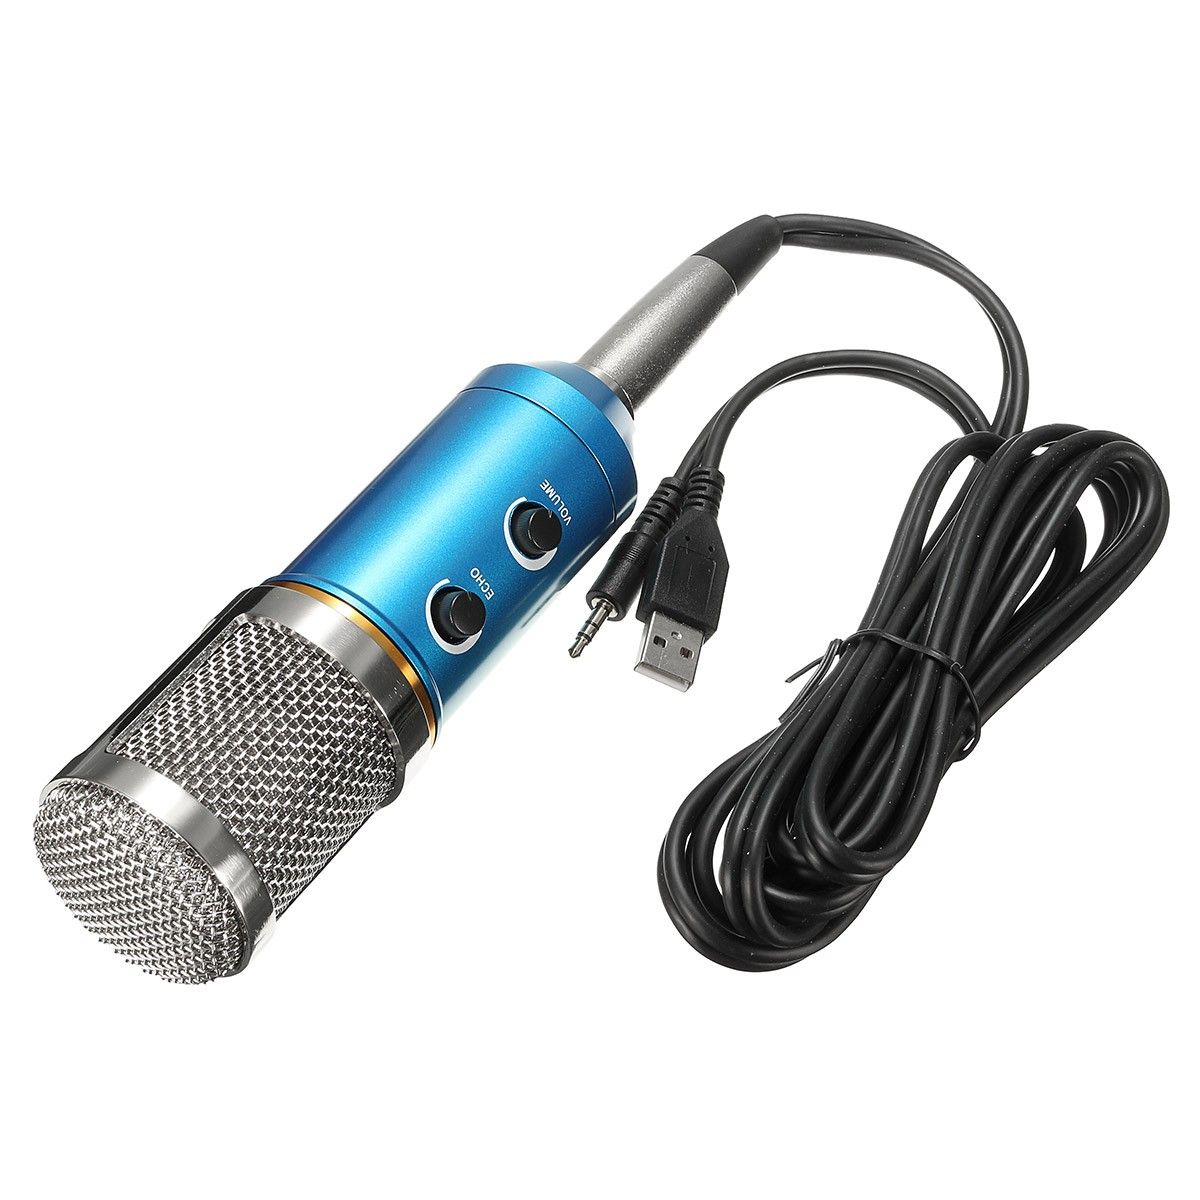 MK-F200TL-Audio-USB-Condenser-Microphone-Sound-Recording-Vocal-Microphone-Mic-Stand-Mount-1156826